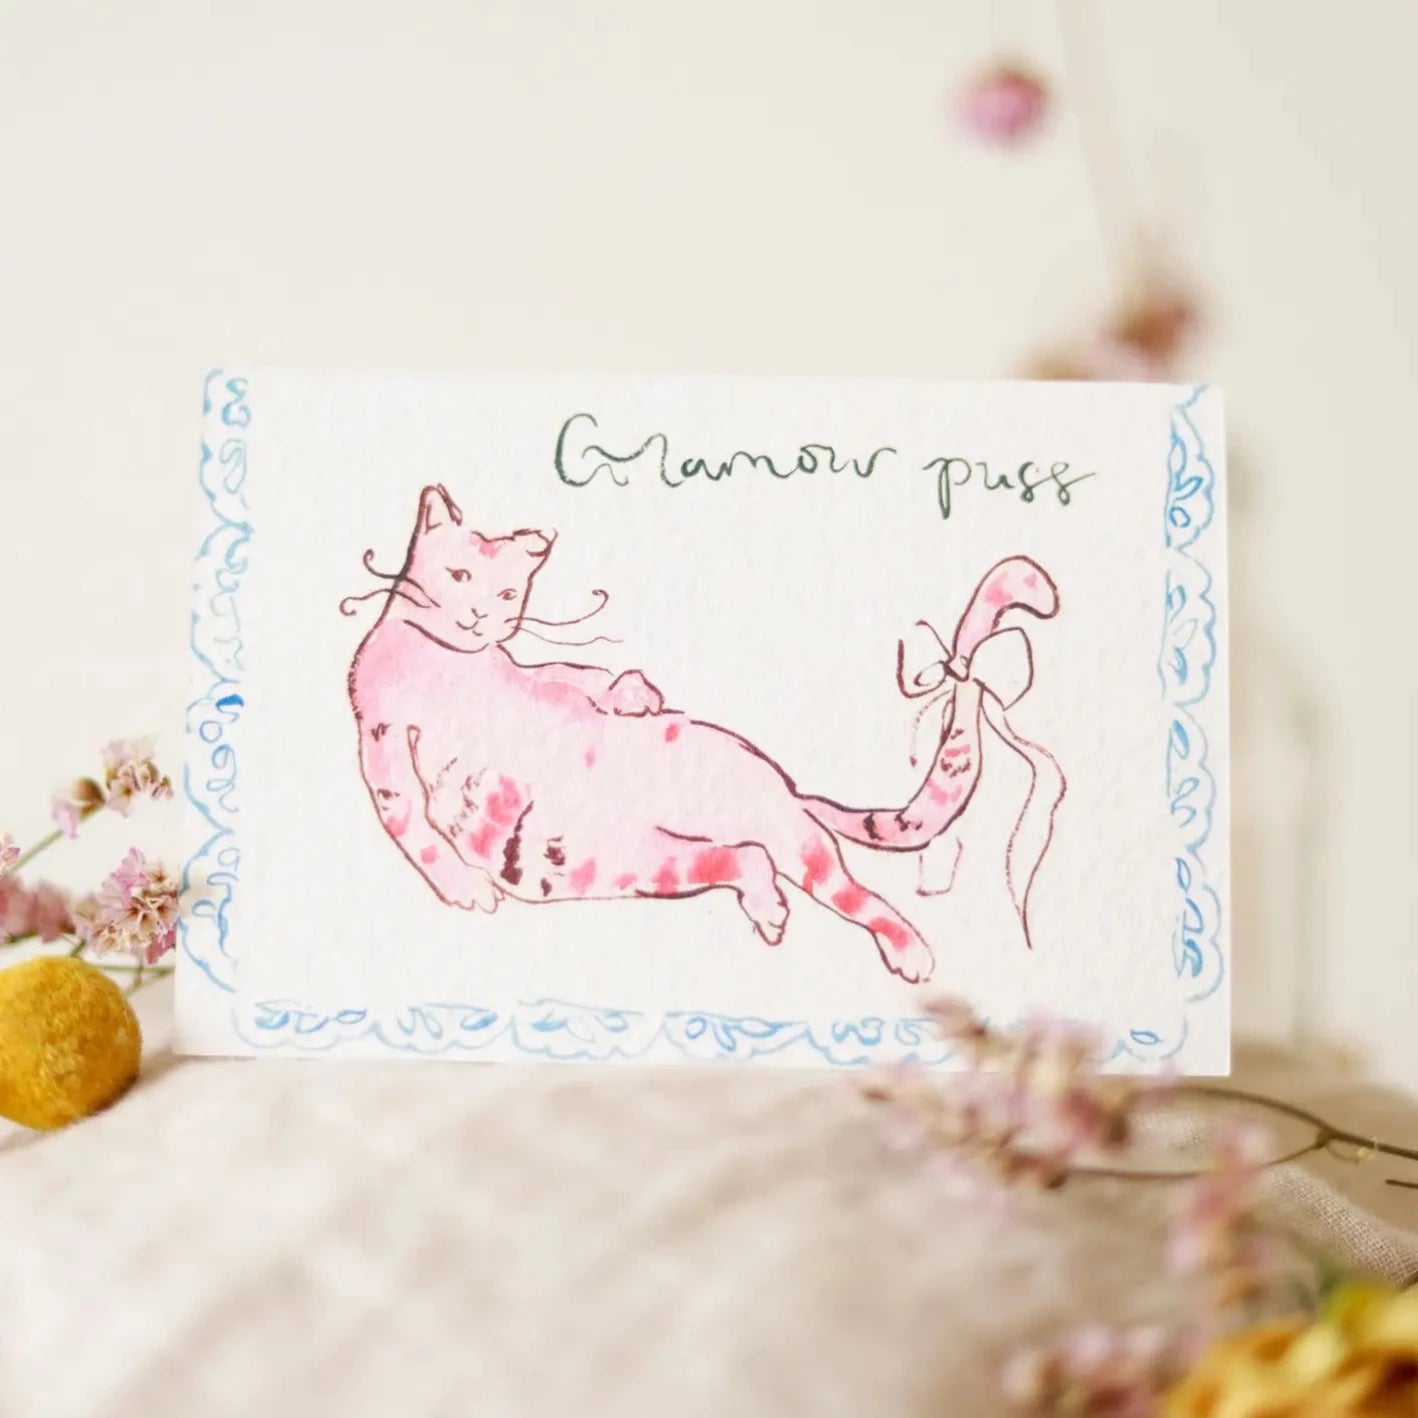 Glamour Puss Greetings Card